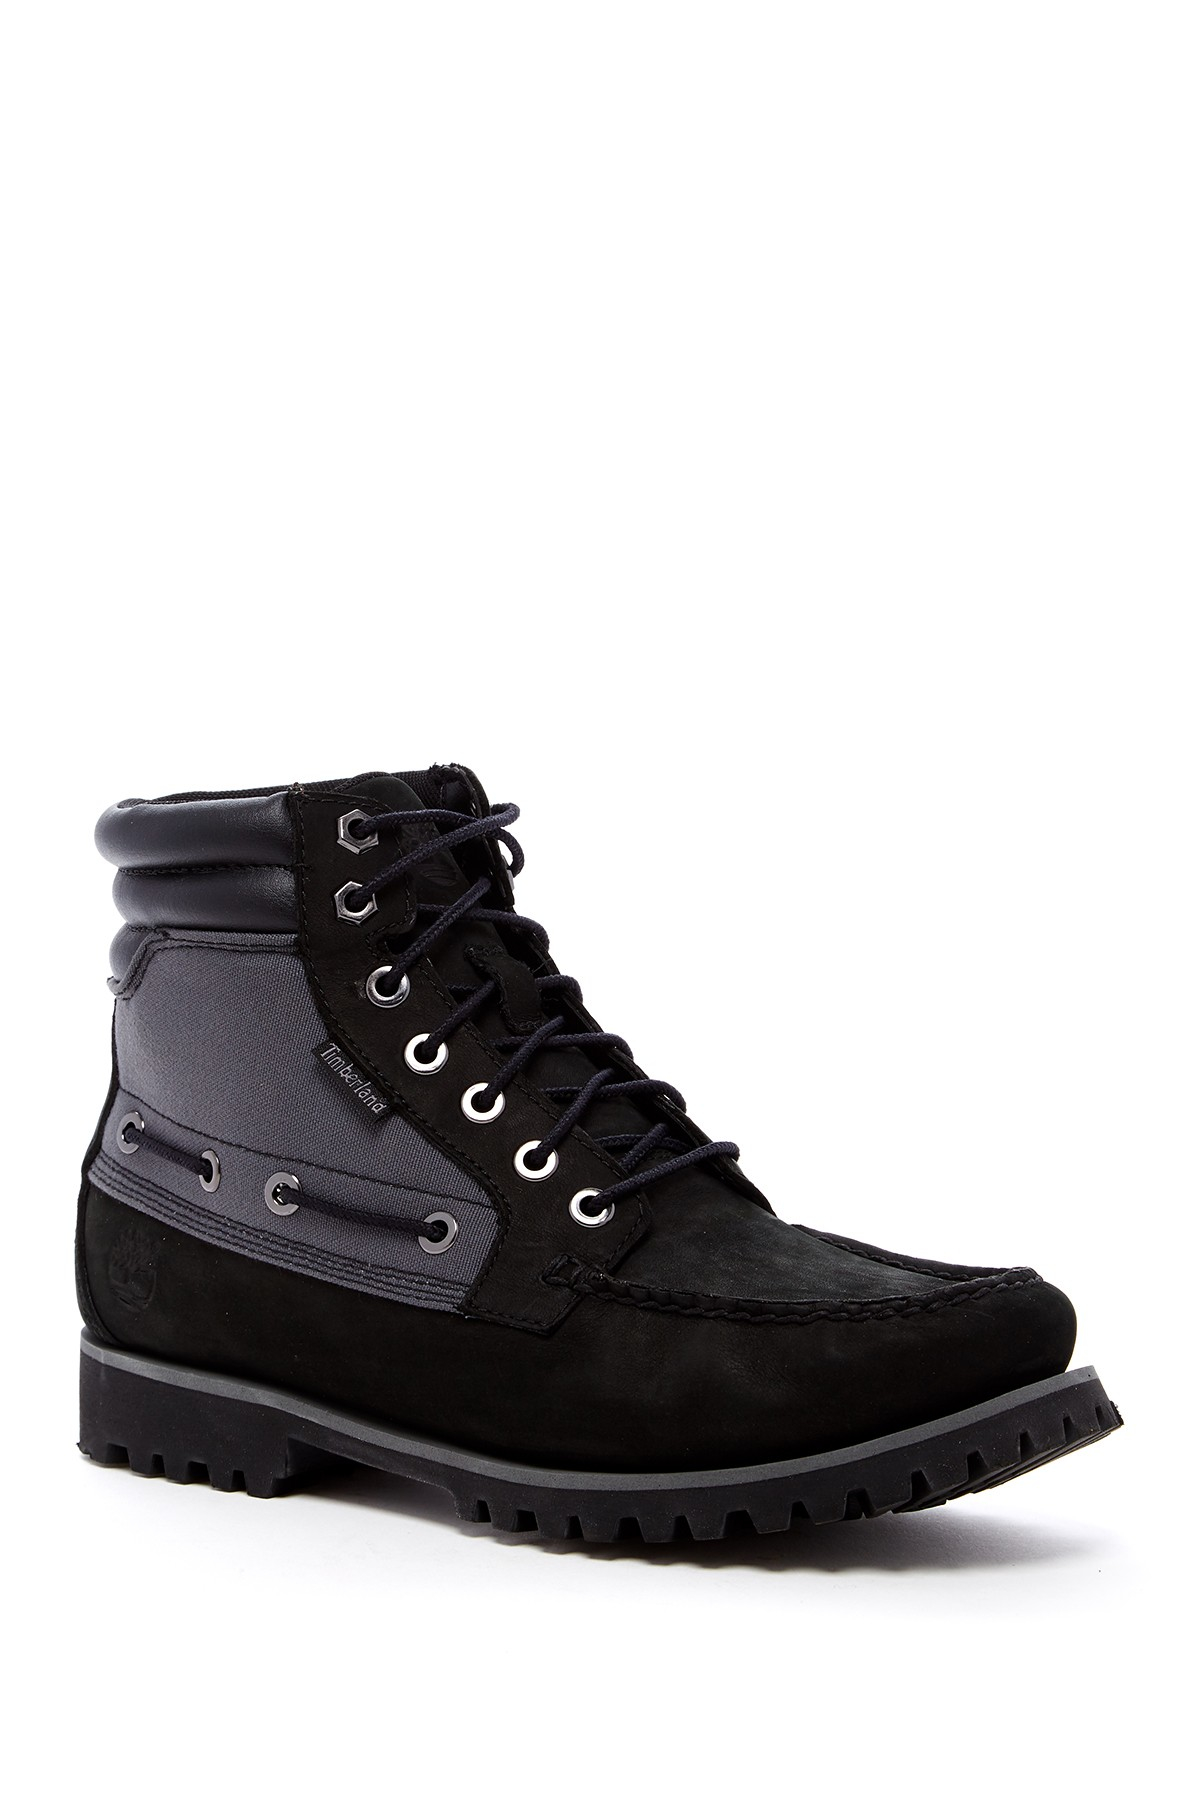 Timberland Oakwell 7-eye Black Boot - Wide Width Available for Men | Lyst